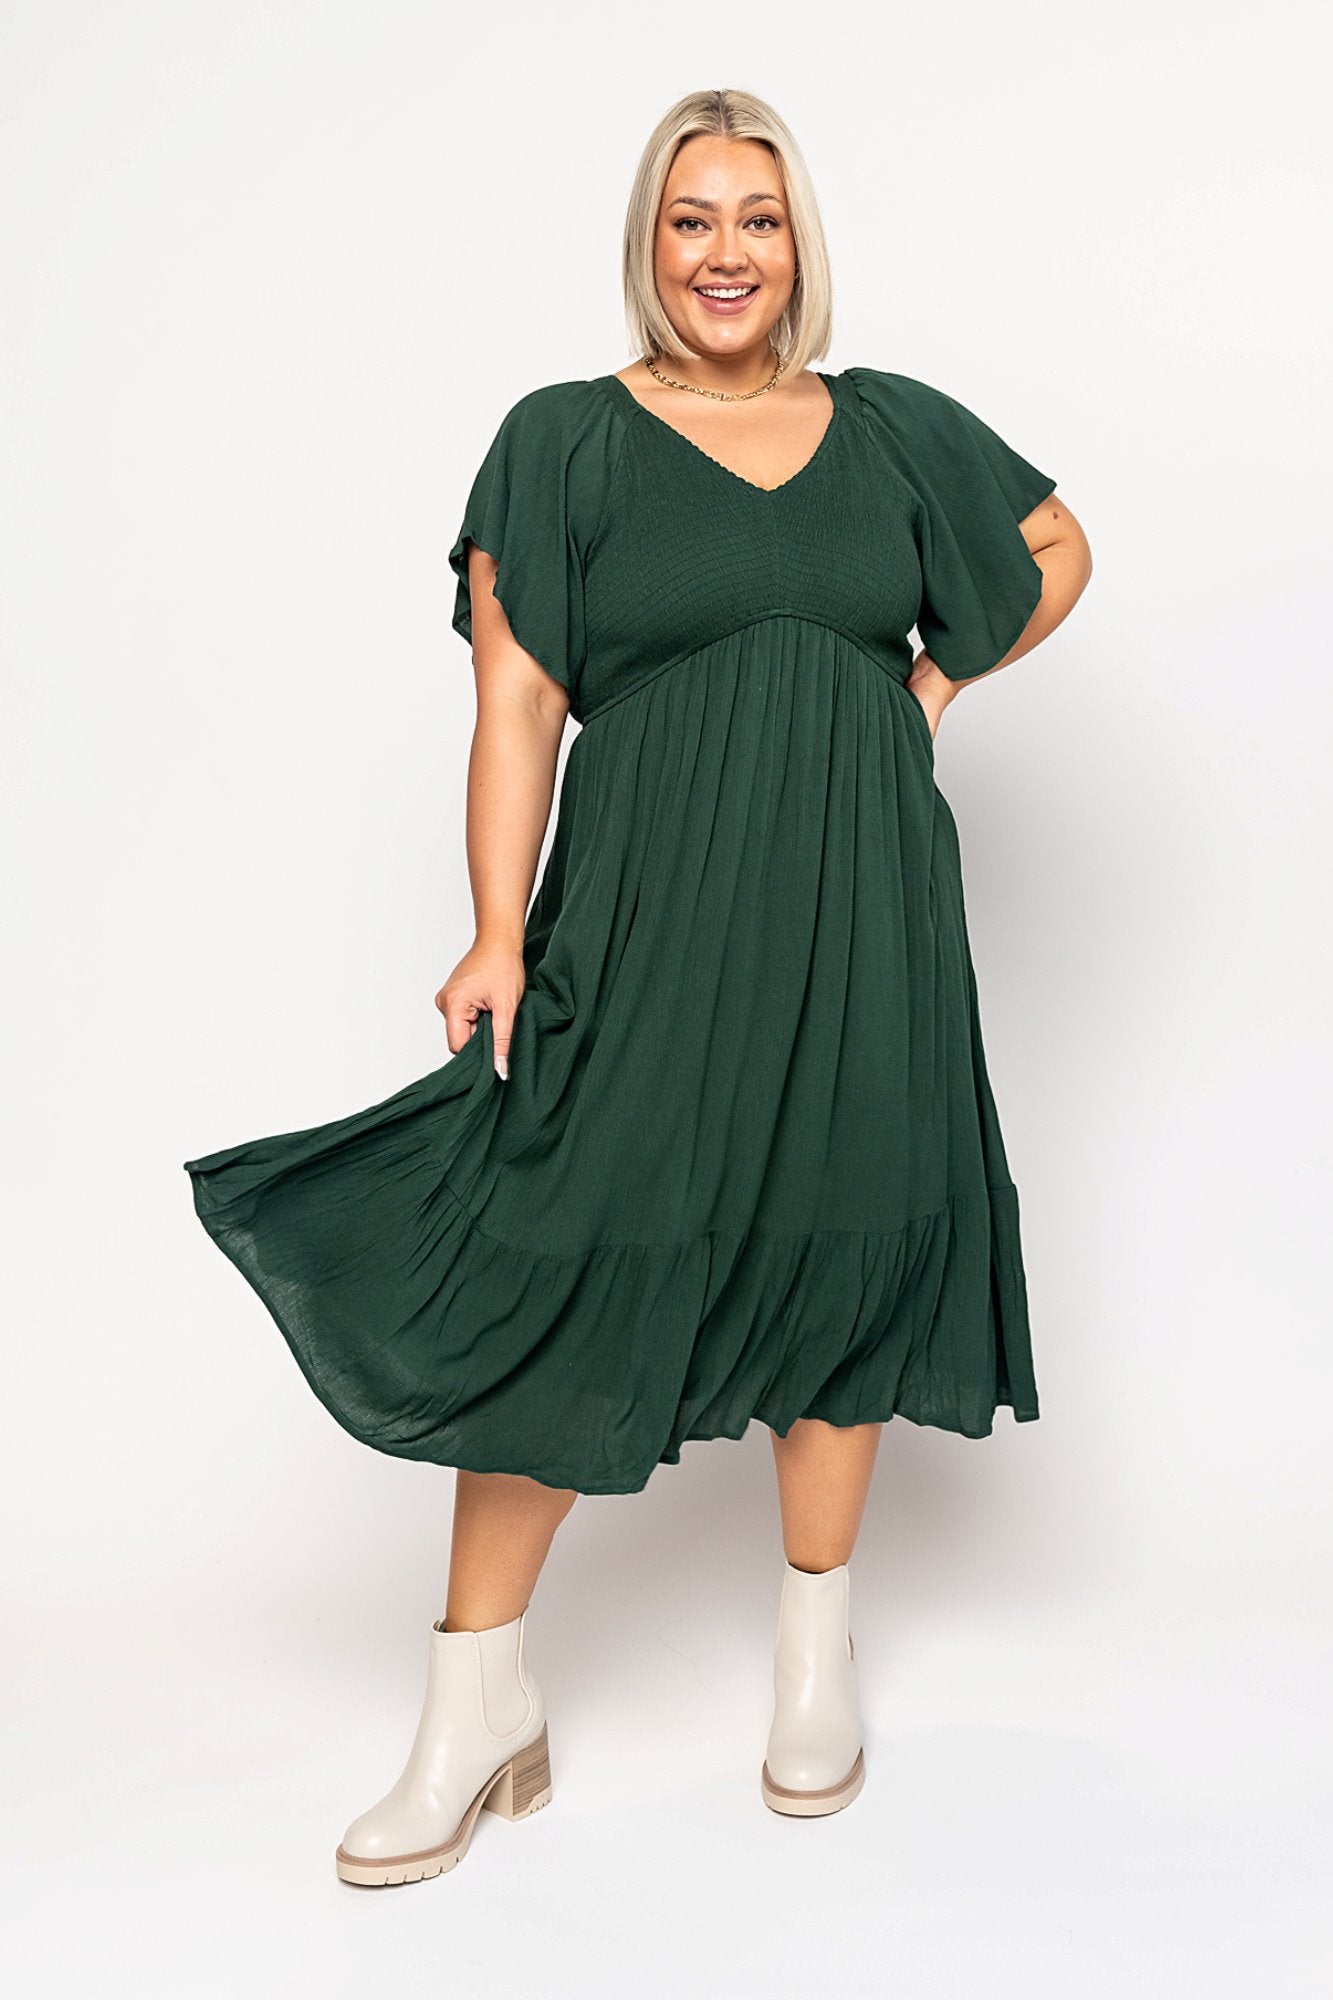 HOLLEY GIRL EXCLUSIVE - Sofia Dress in Emerald Holley Girl 